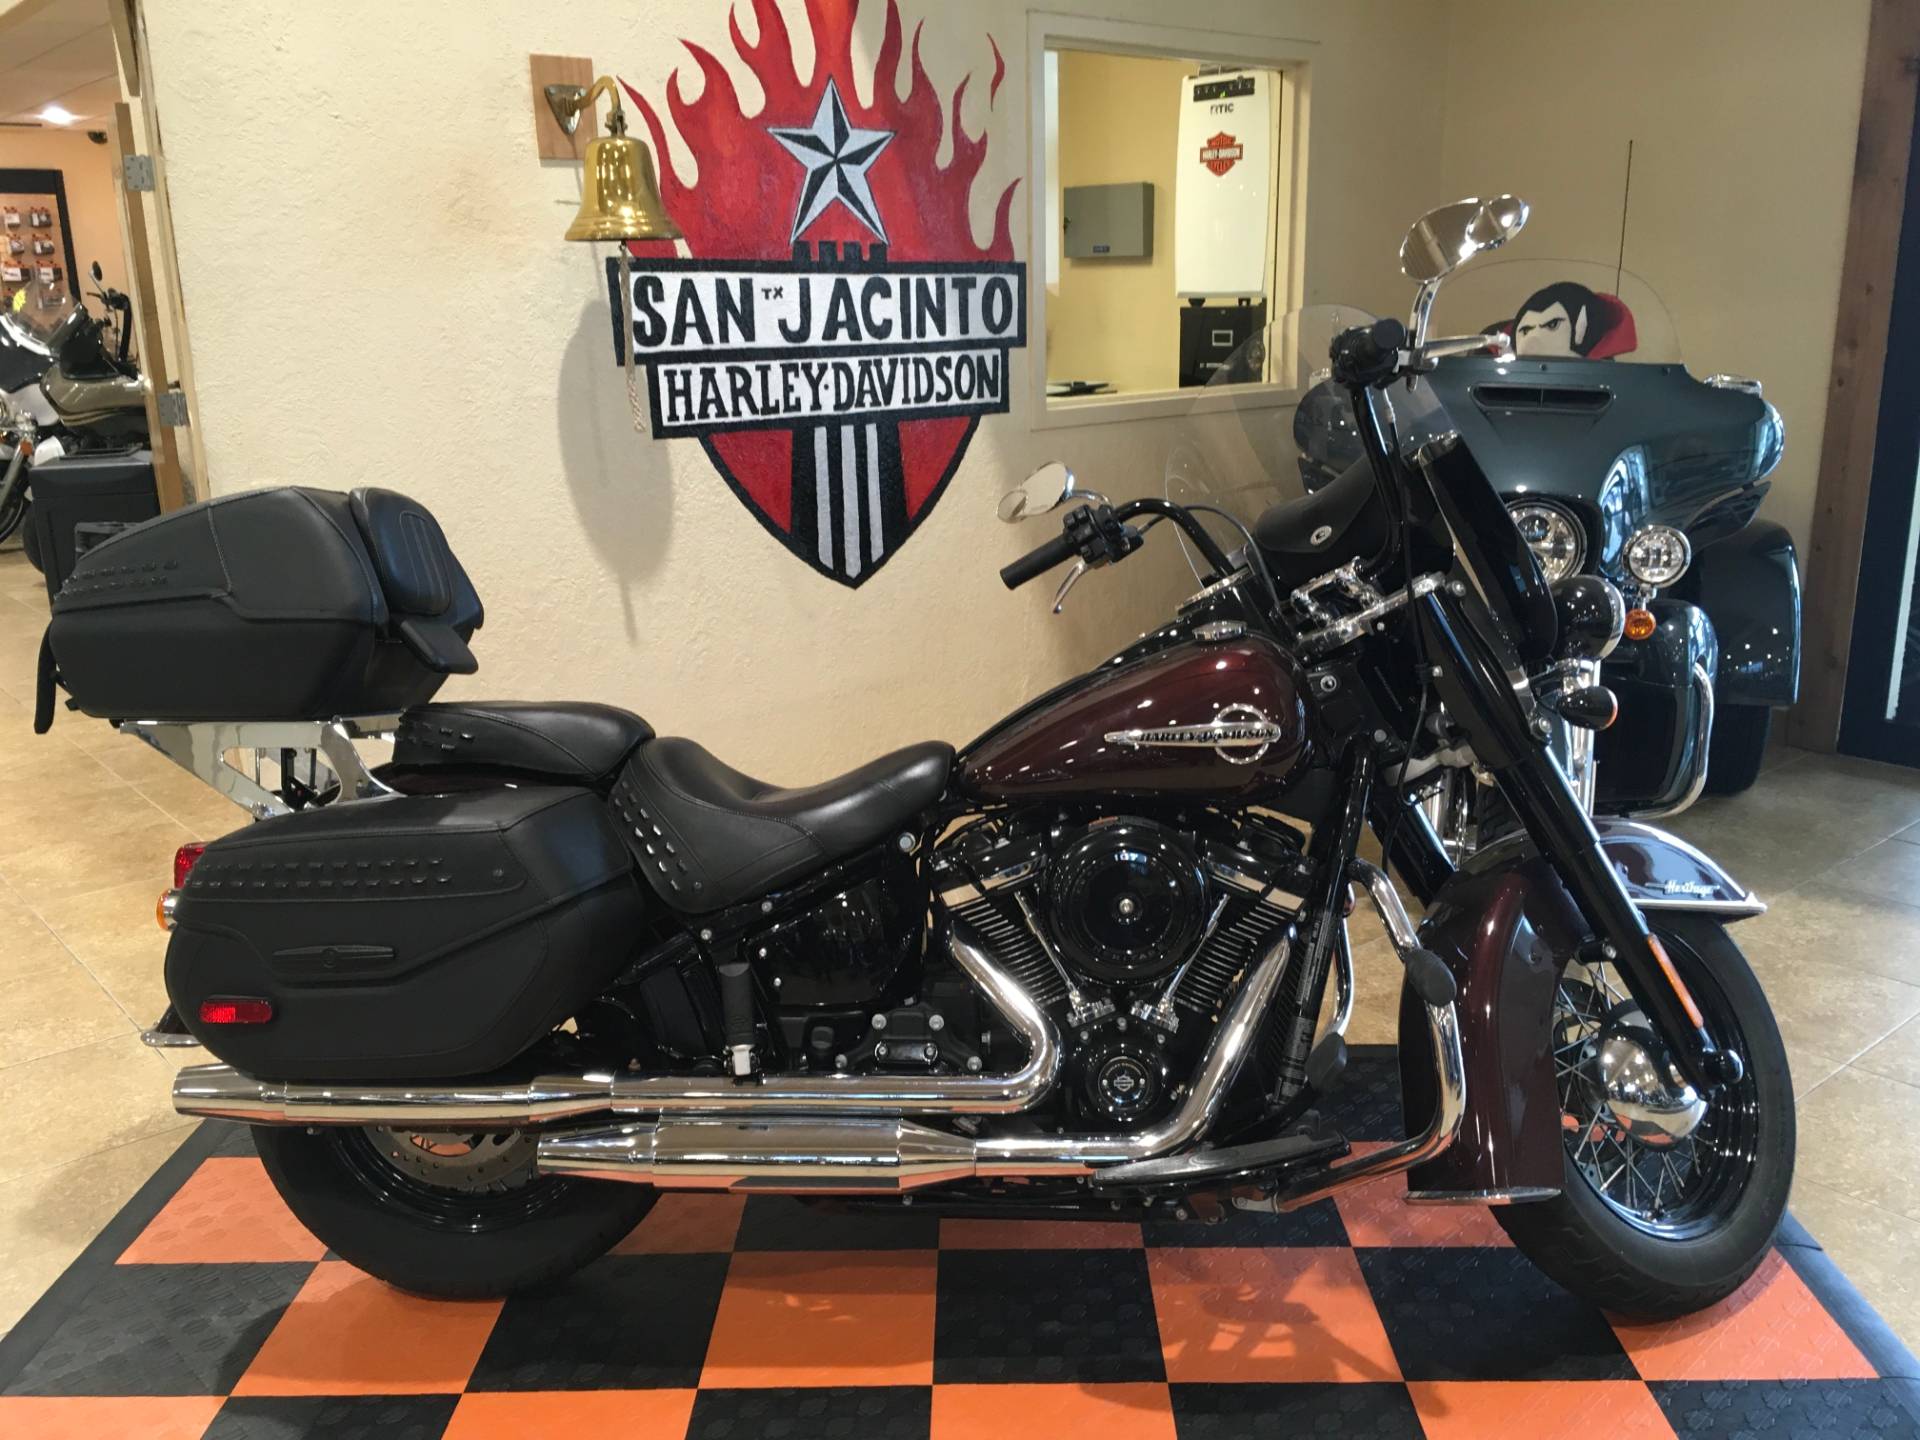 Used 2018 Harley Davidson Heritage Classic Motorcycles In Pasadena Tx 044218a Twisted Cherry